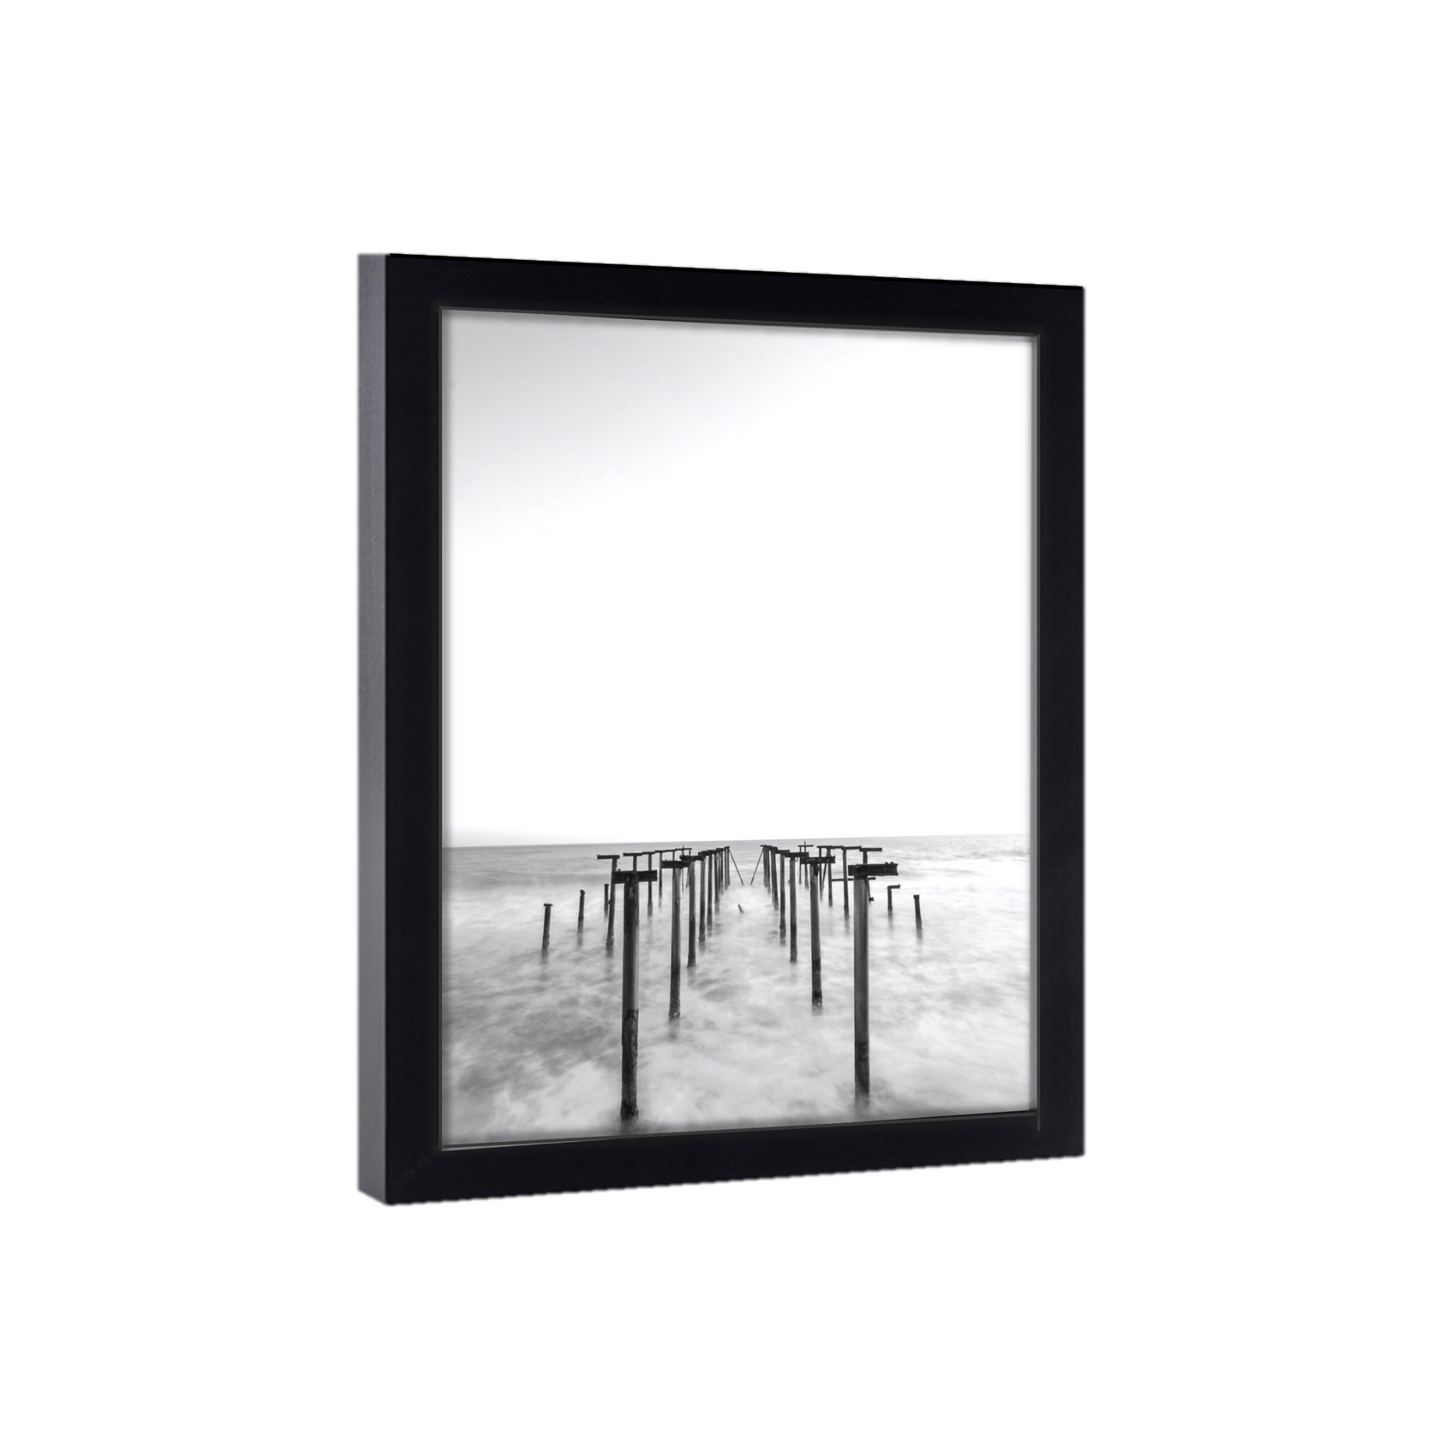 Gallery Wall 31x17 Picture Frame Black Wood 31x17  Poster Size